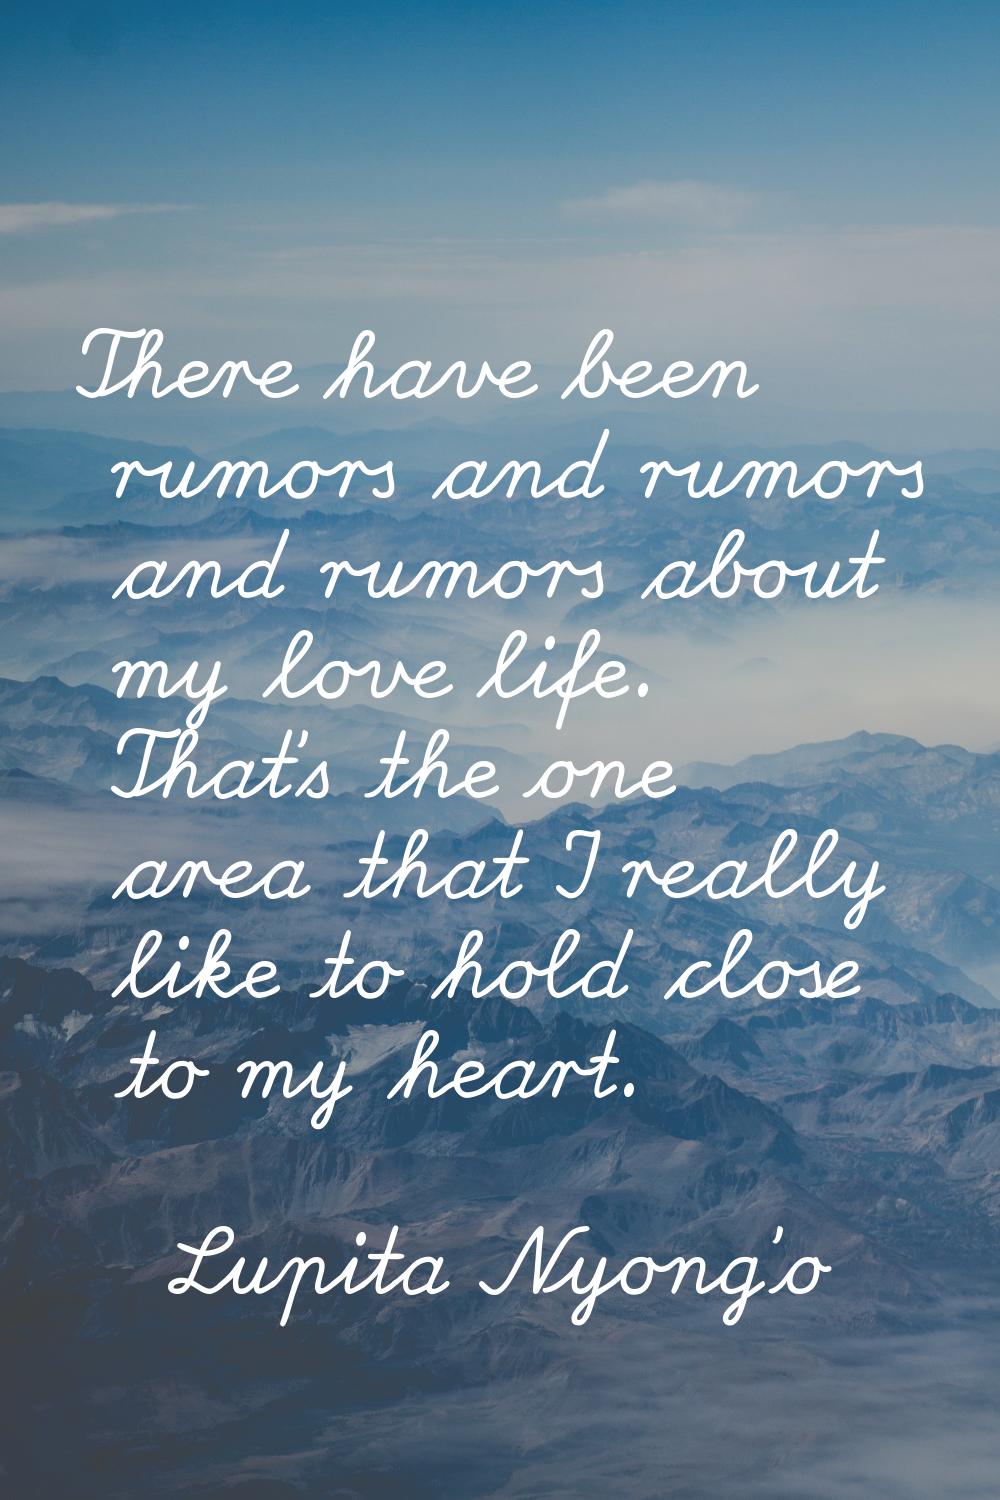 There have been rumors and rumors and rumors about my love life. That's the one area that I really 